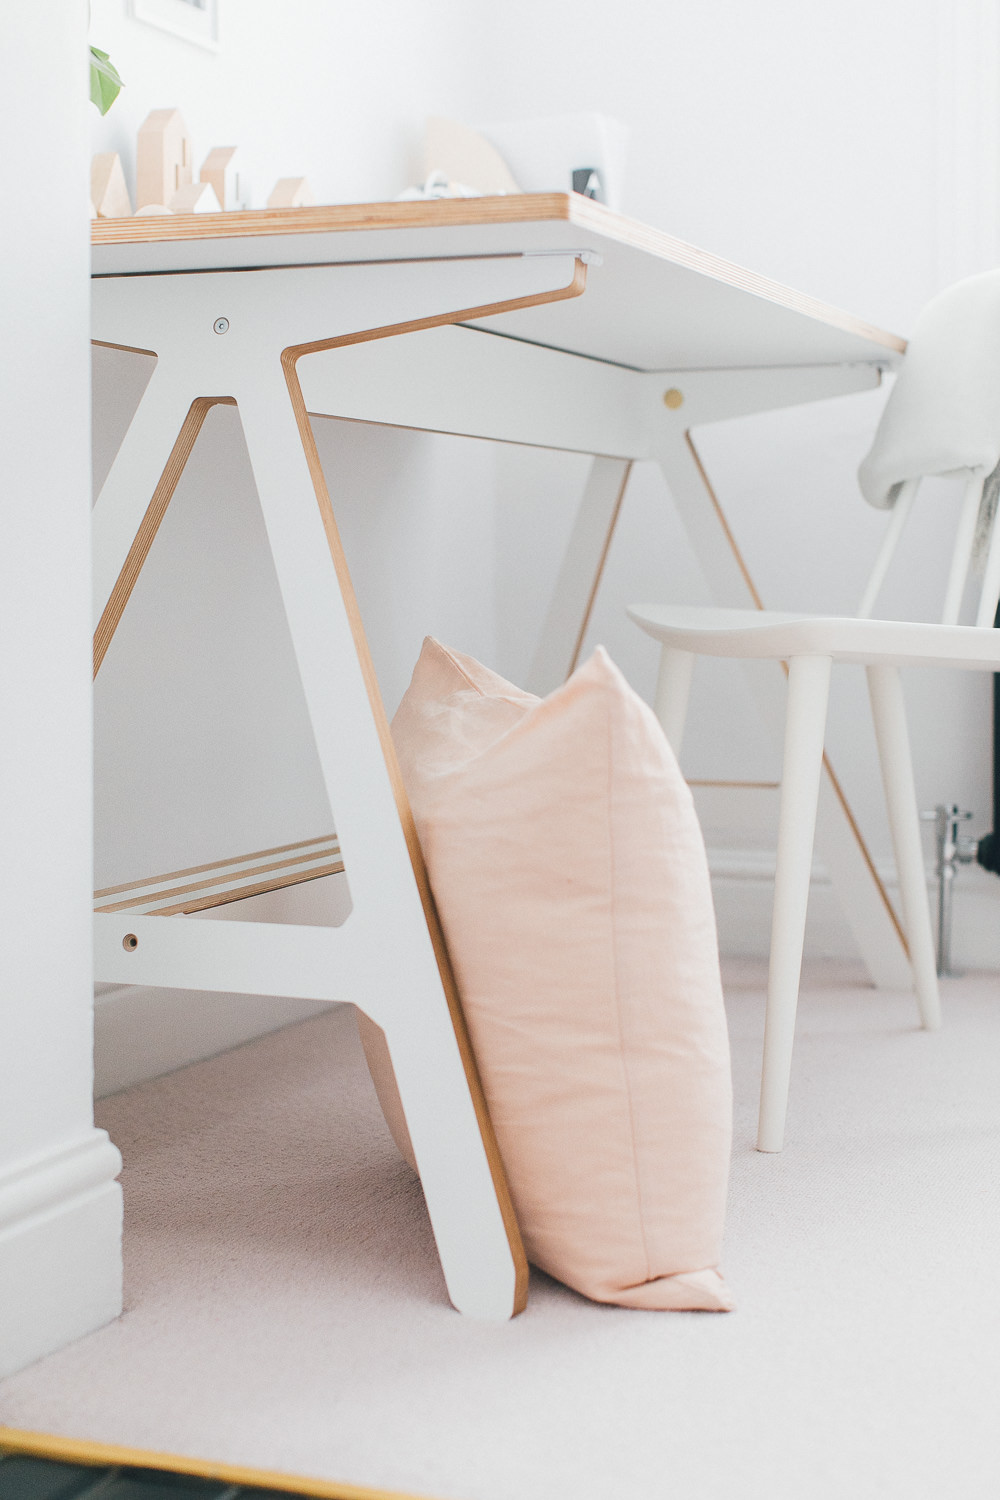 Blush Pink Cushion | A Frame Desk | Neutral Desk Accessories | White Desk Chair | Statement Wall Light | A modern neutral millennial pink bedroom for children with handmade furniture, personalised artwork and statement lighting